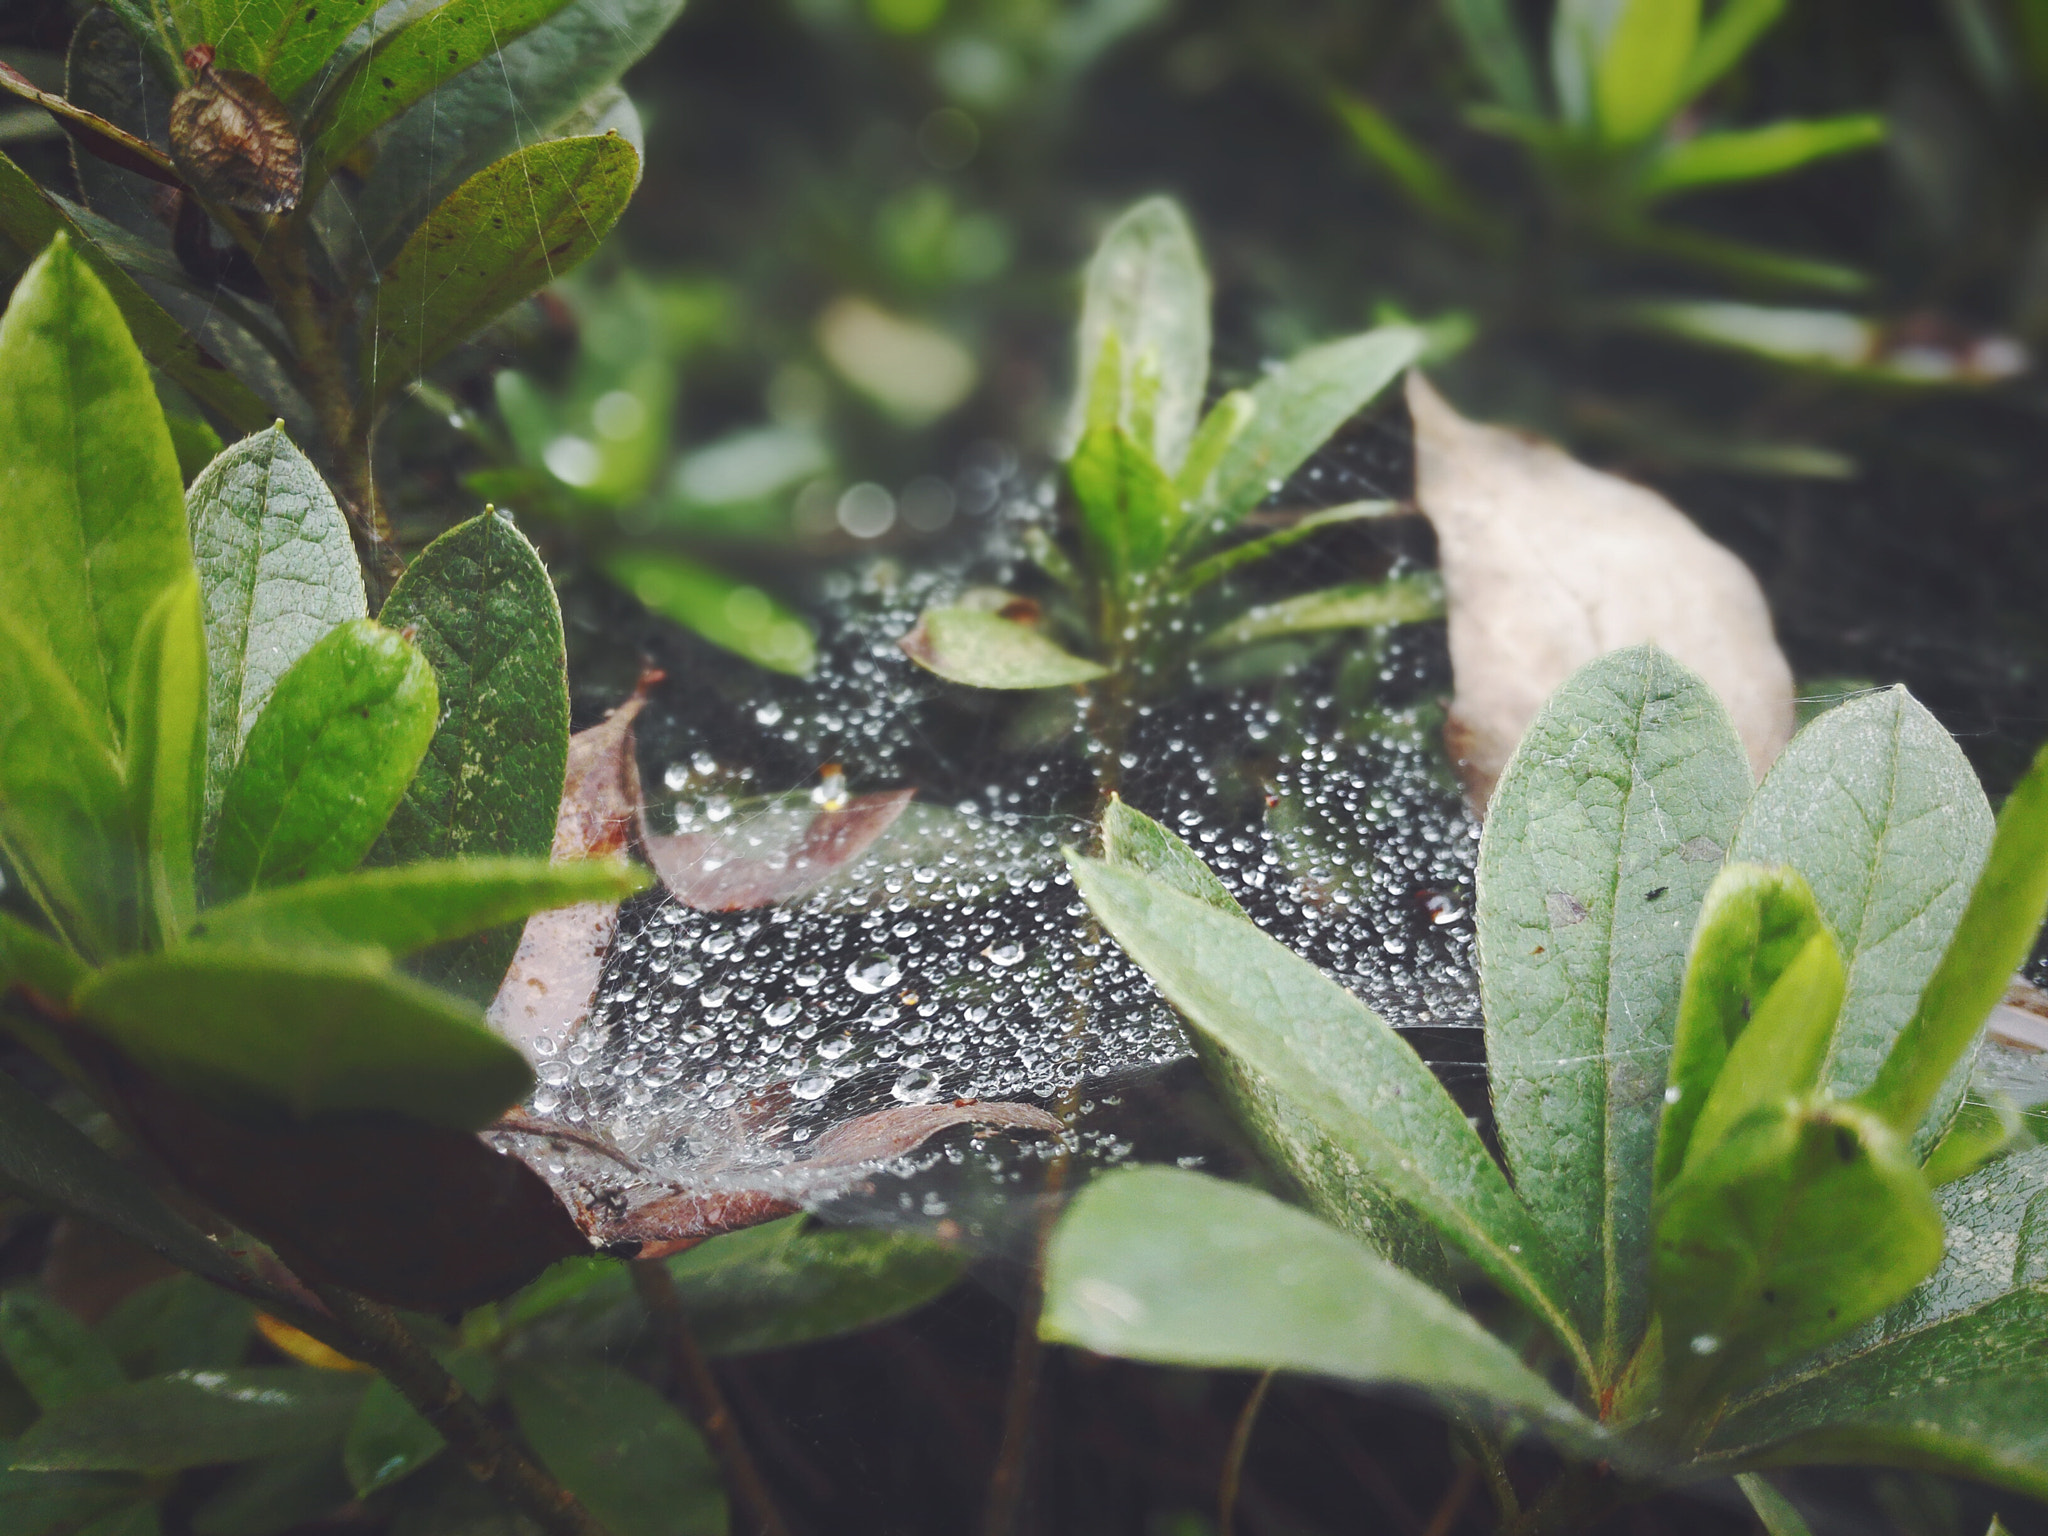 HUAWEI PE-CL00 sample photo. Dewdrops on spider web photography